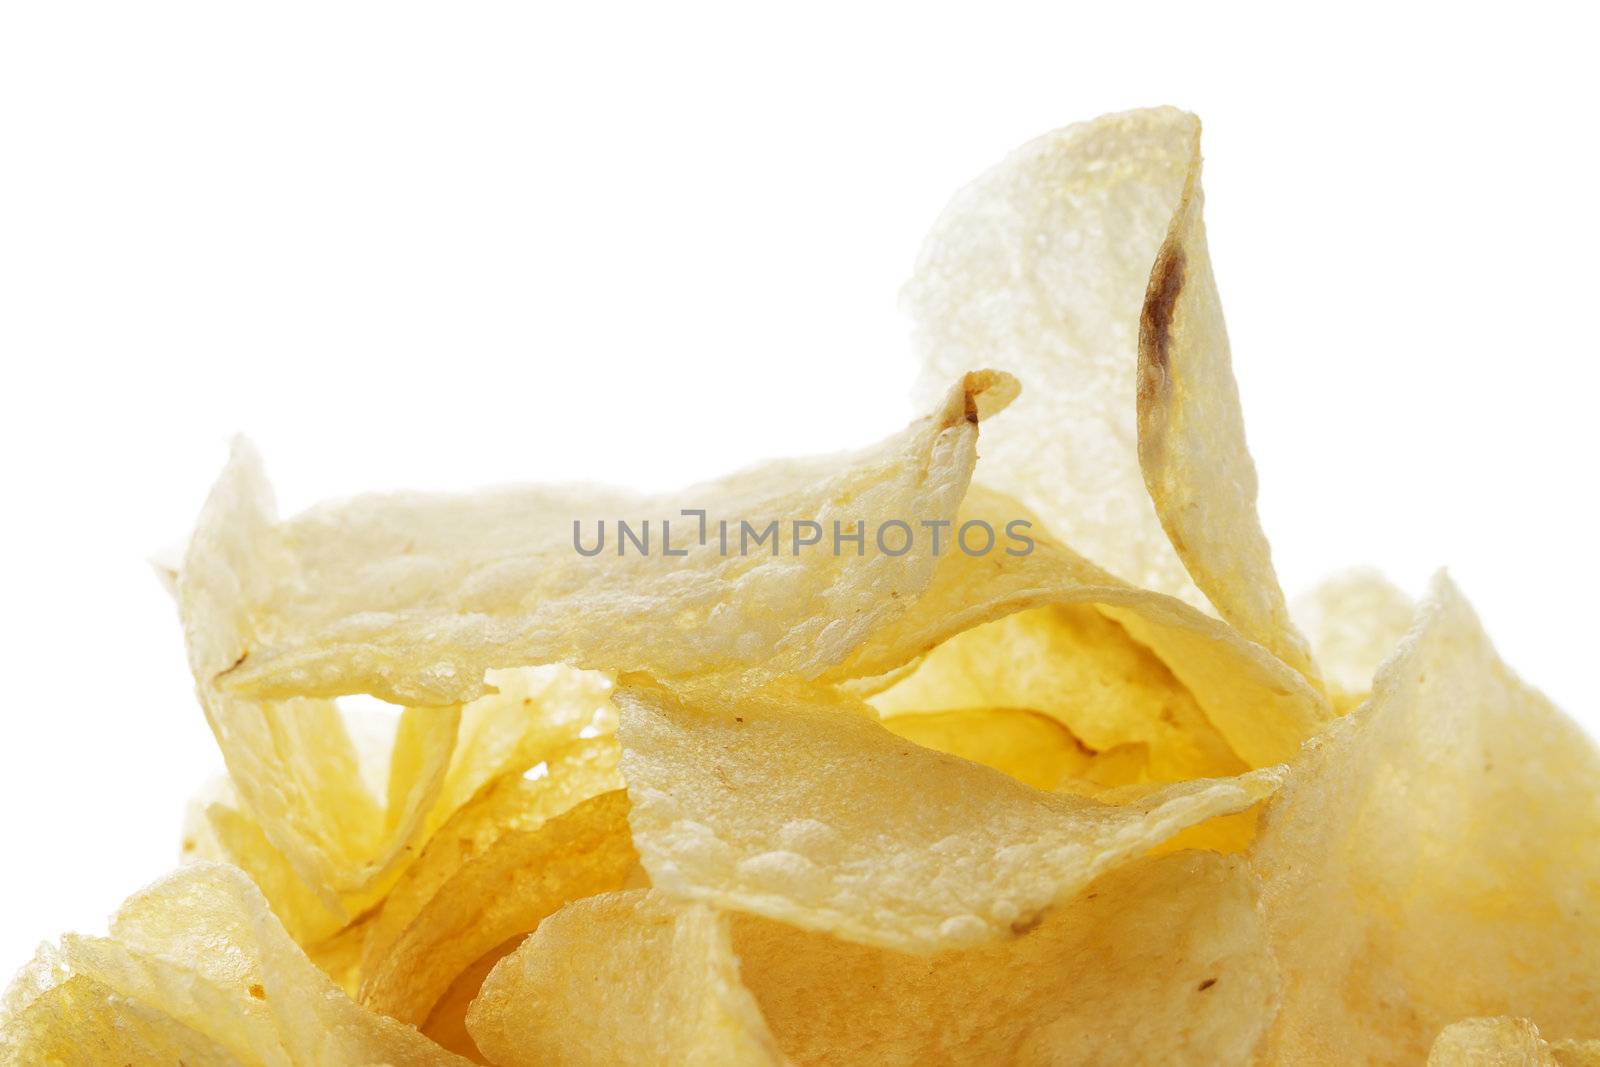  closeup of salted potato chips on white background